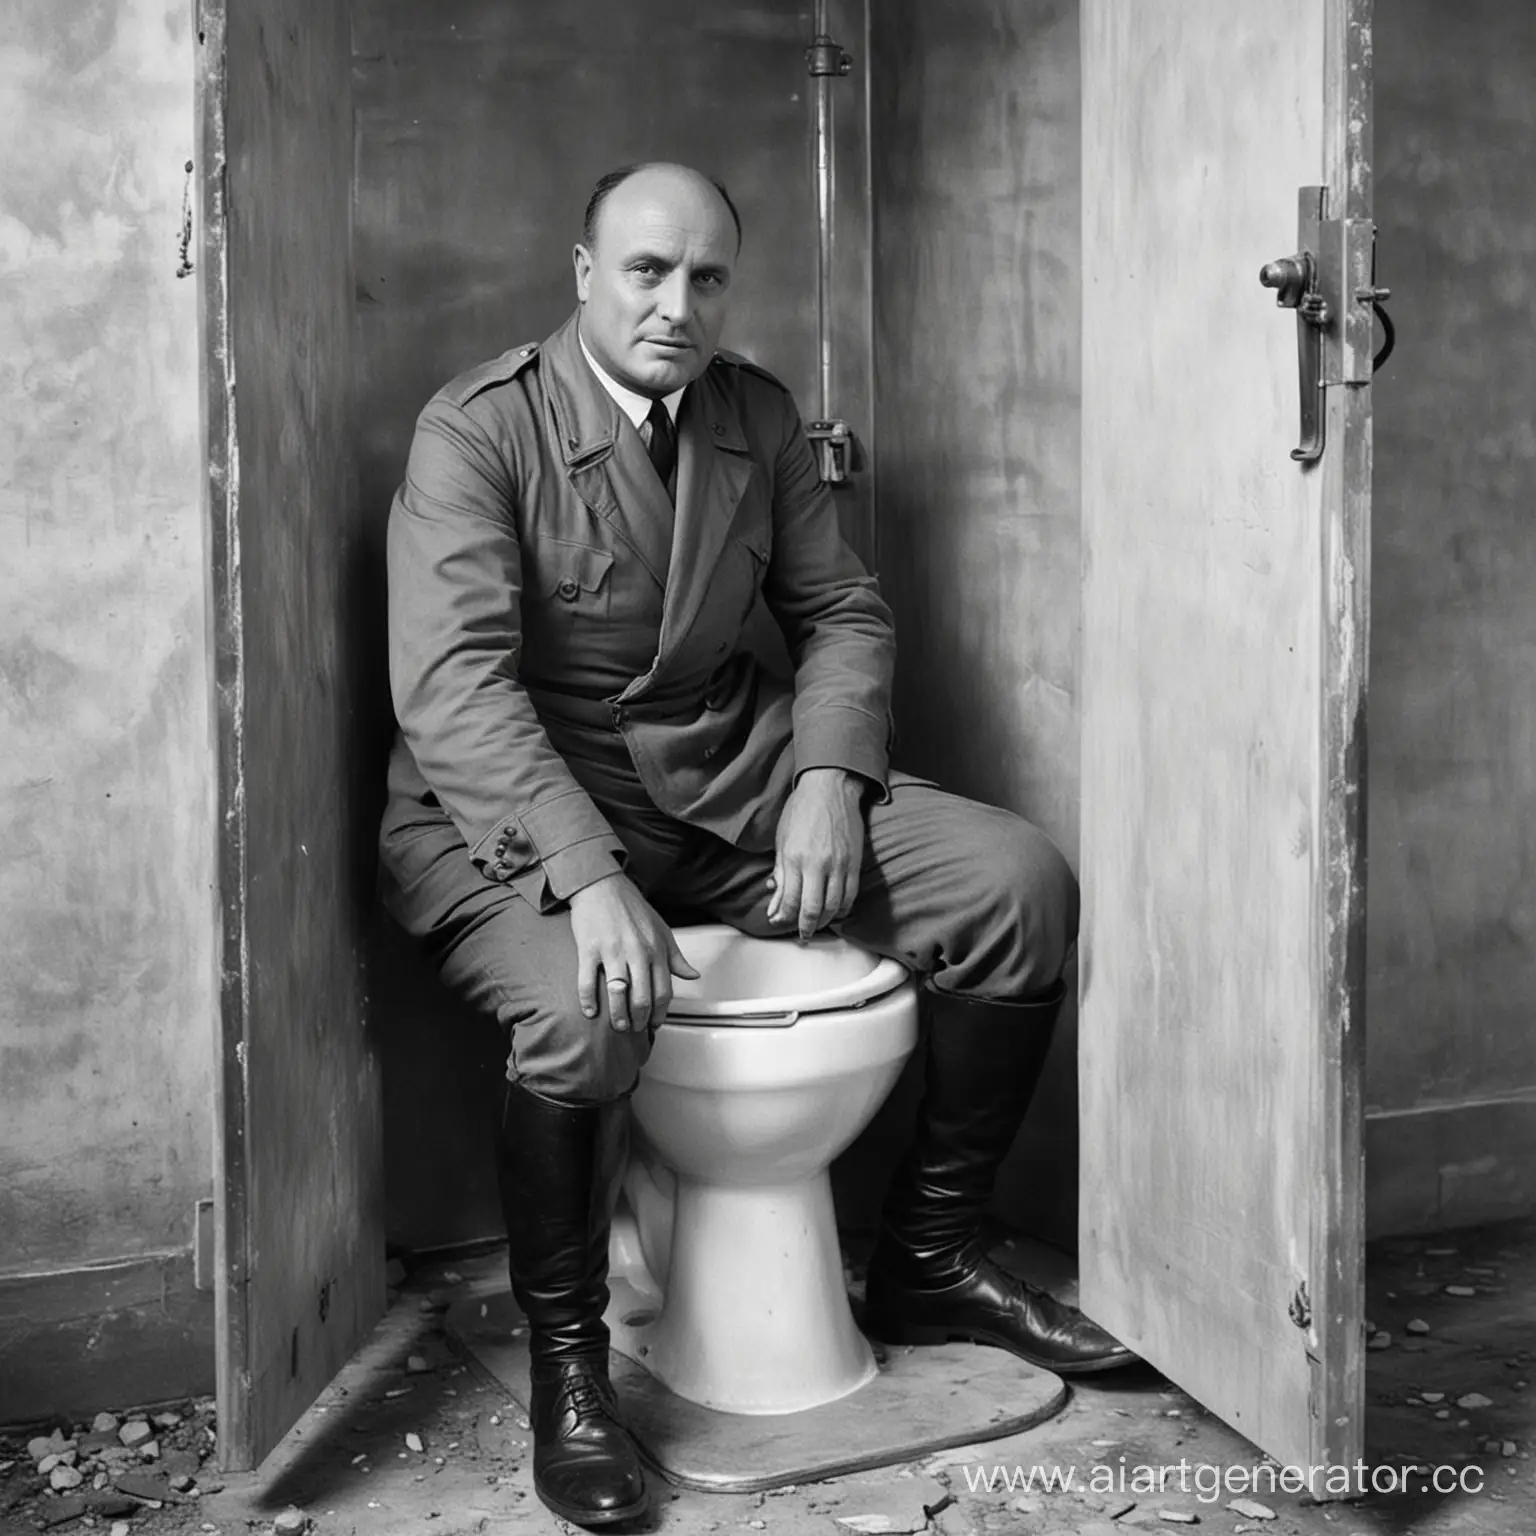 Benito-Mussolini-Using-an-Outdoor-Outhouse-in-Countryside